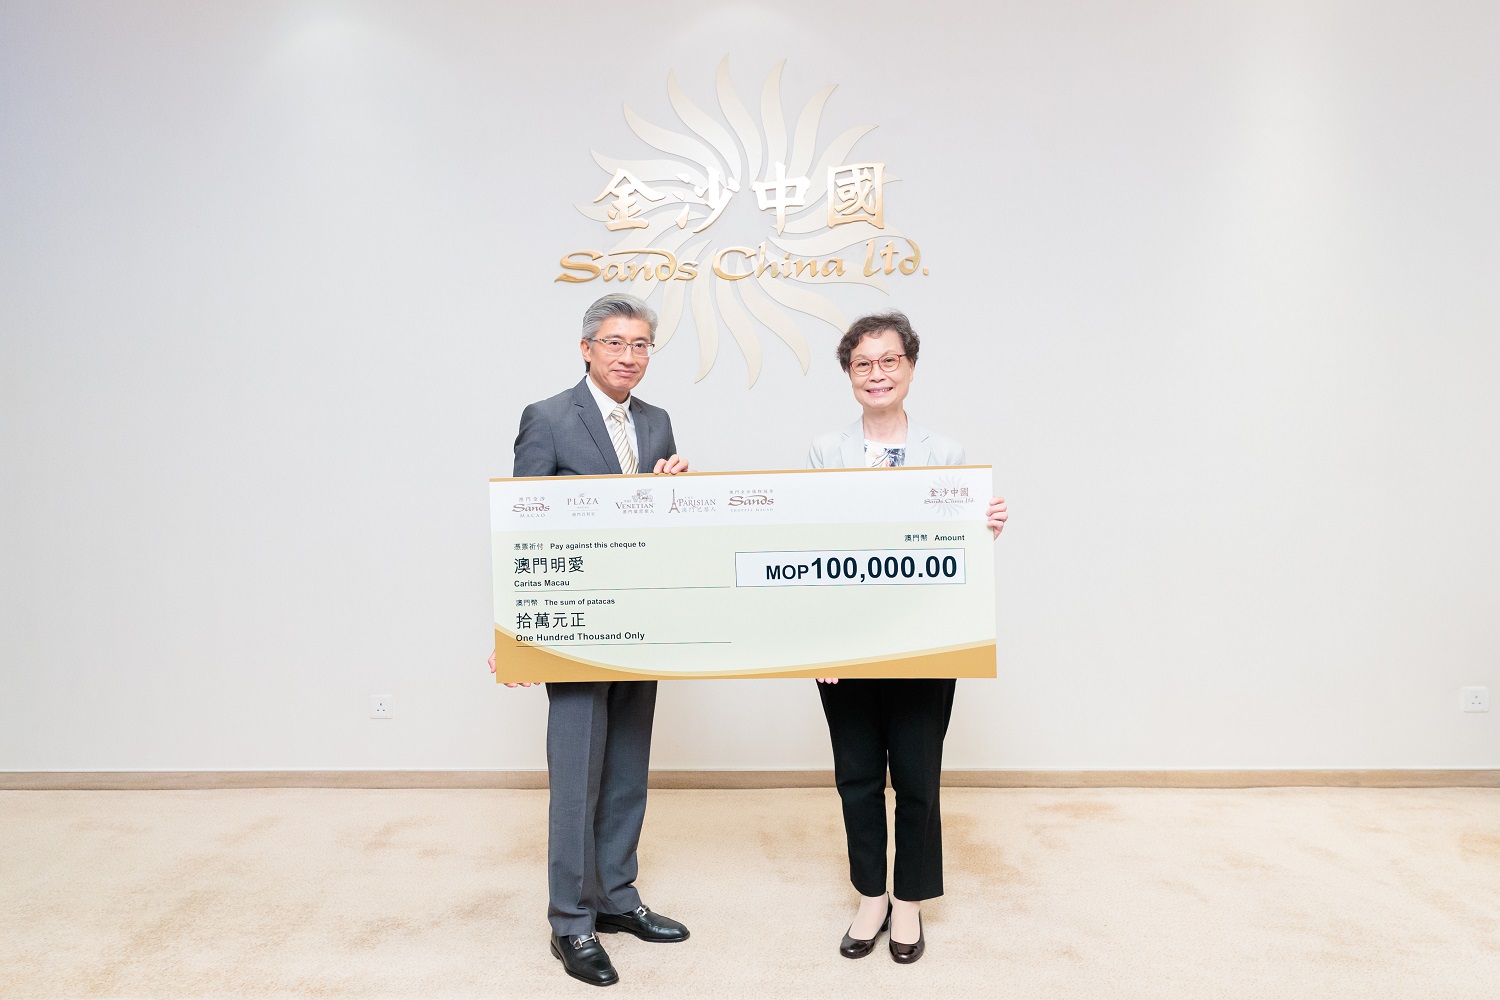 Sands China Presents Light the Night Run Donation Cheques 